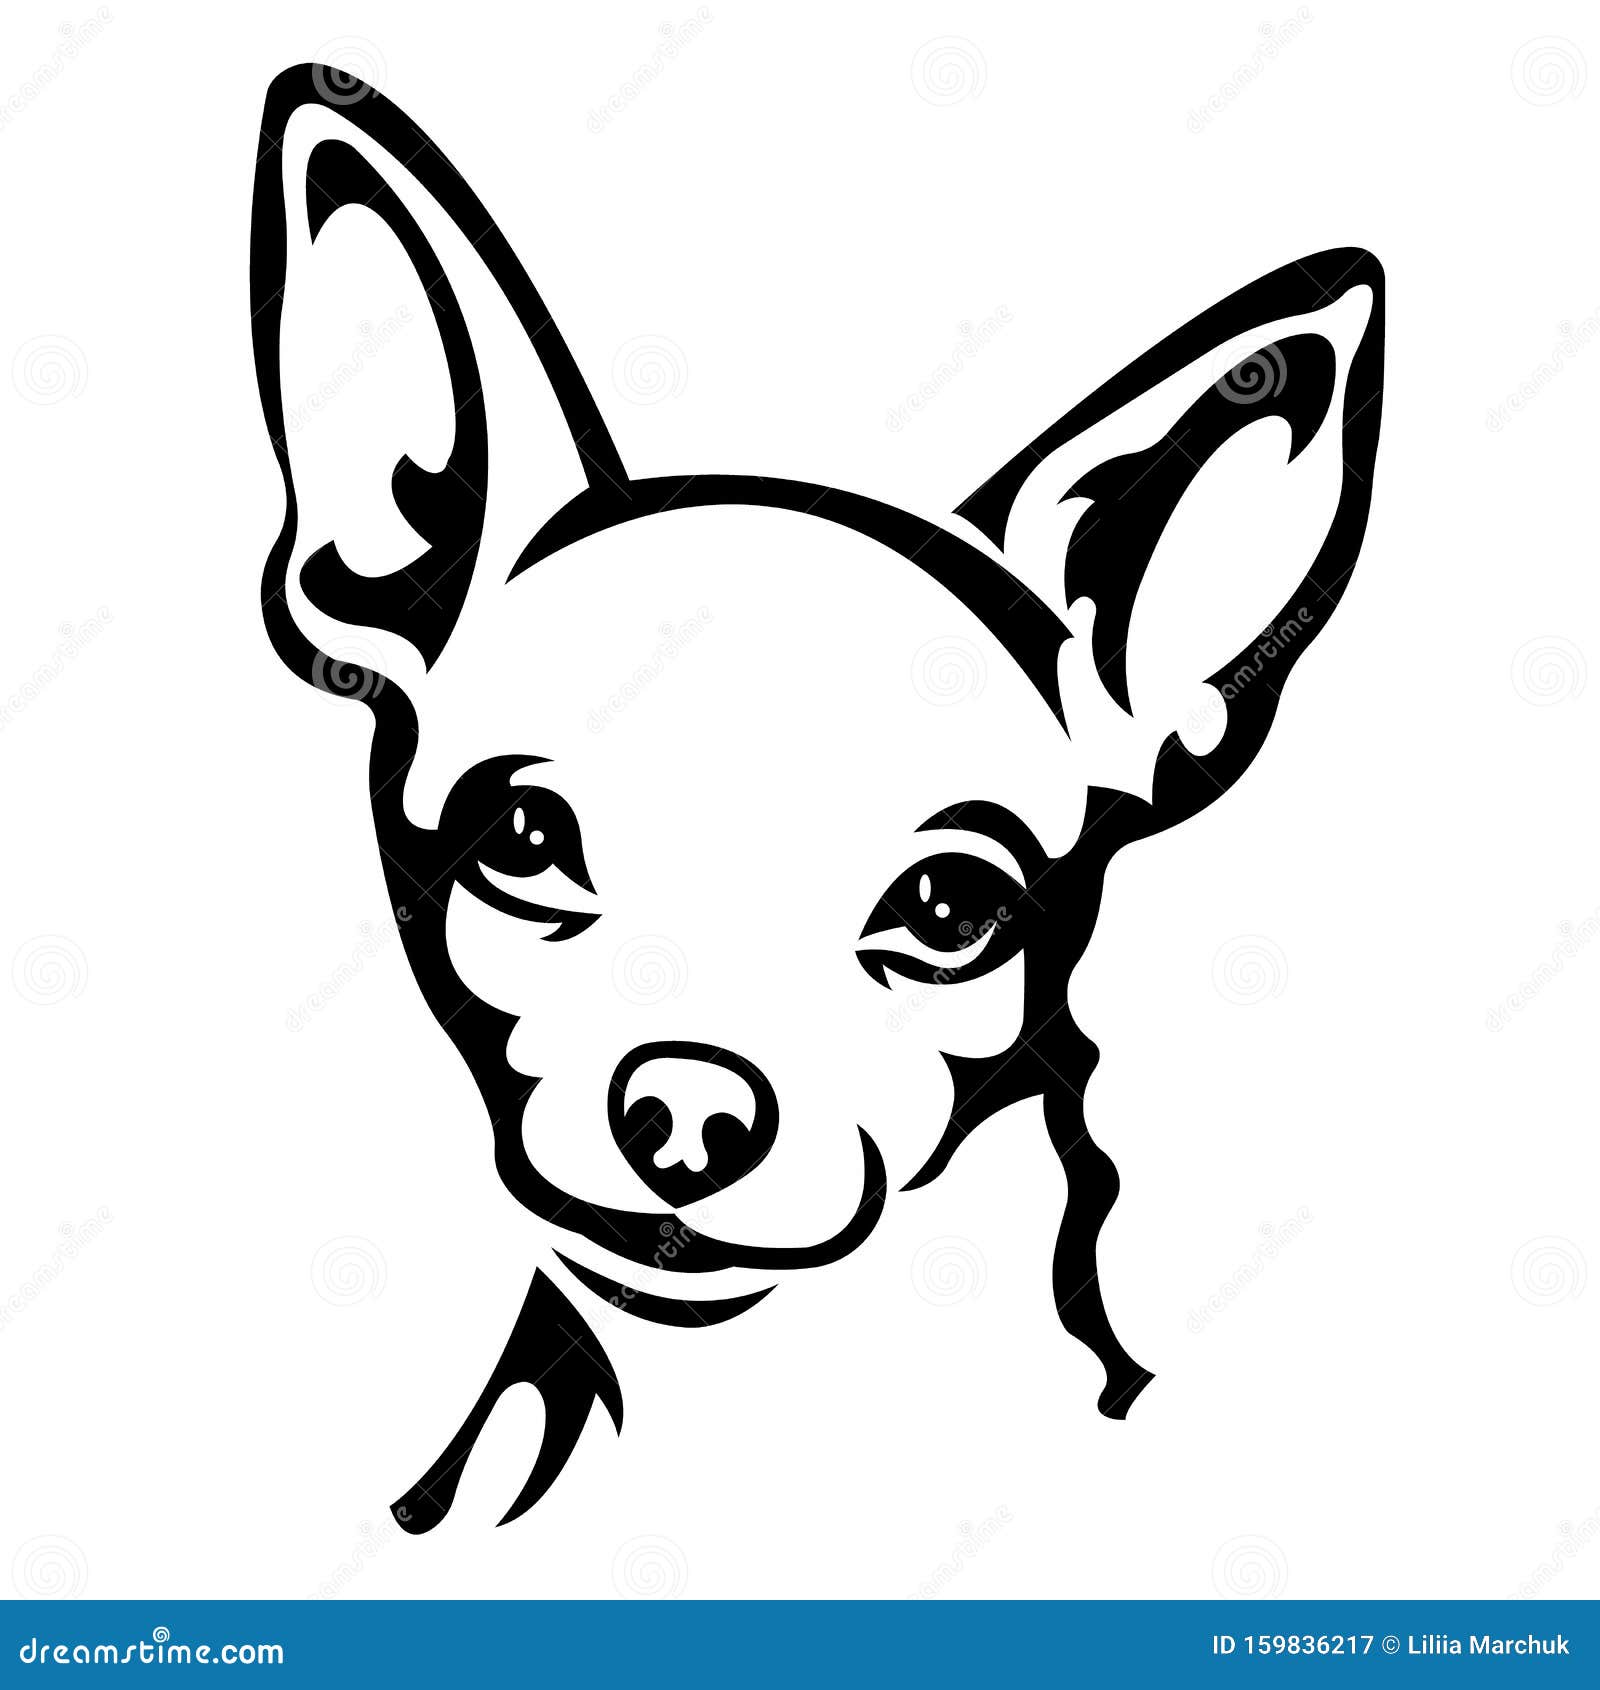 The Silhouette, Contour of the Muzzle of a Chihuahua Breed in Black